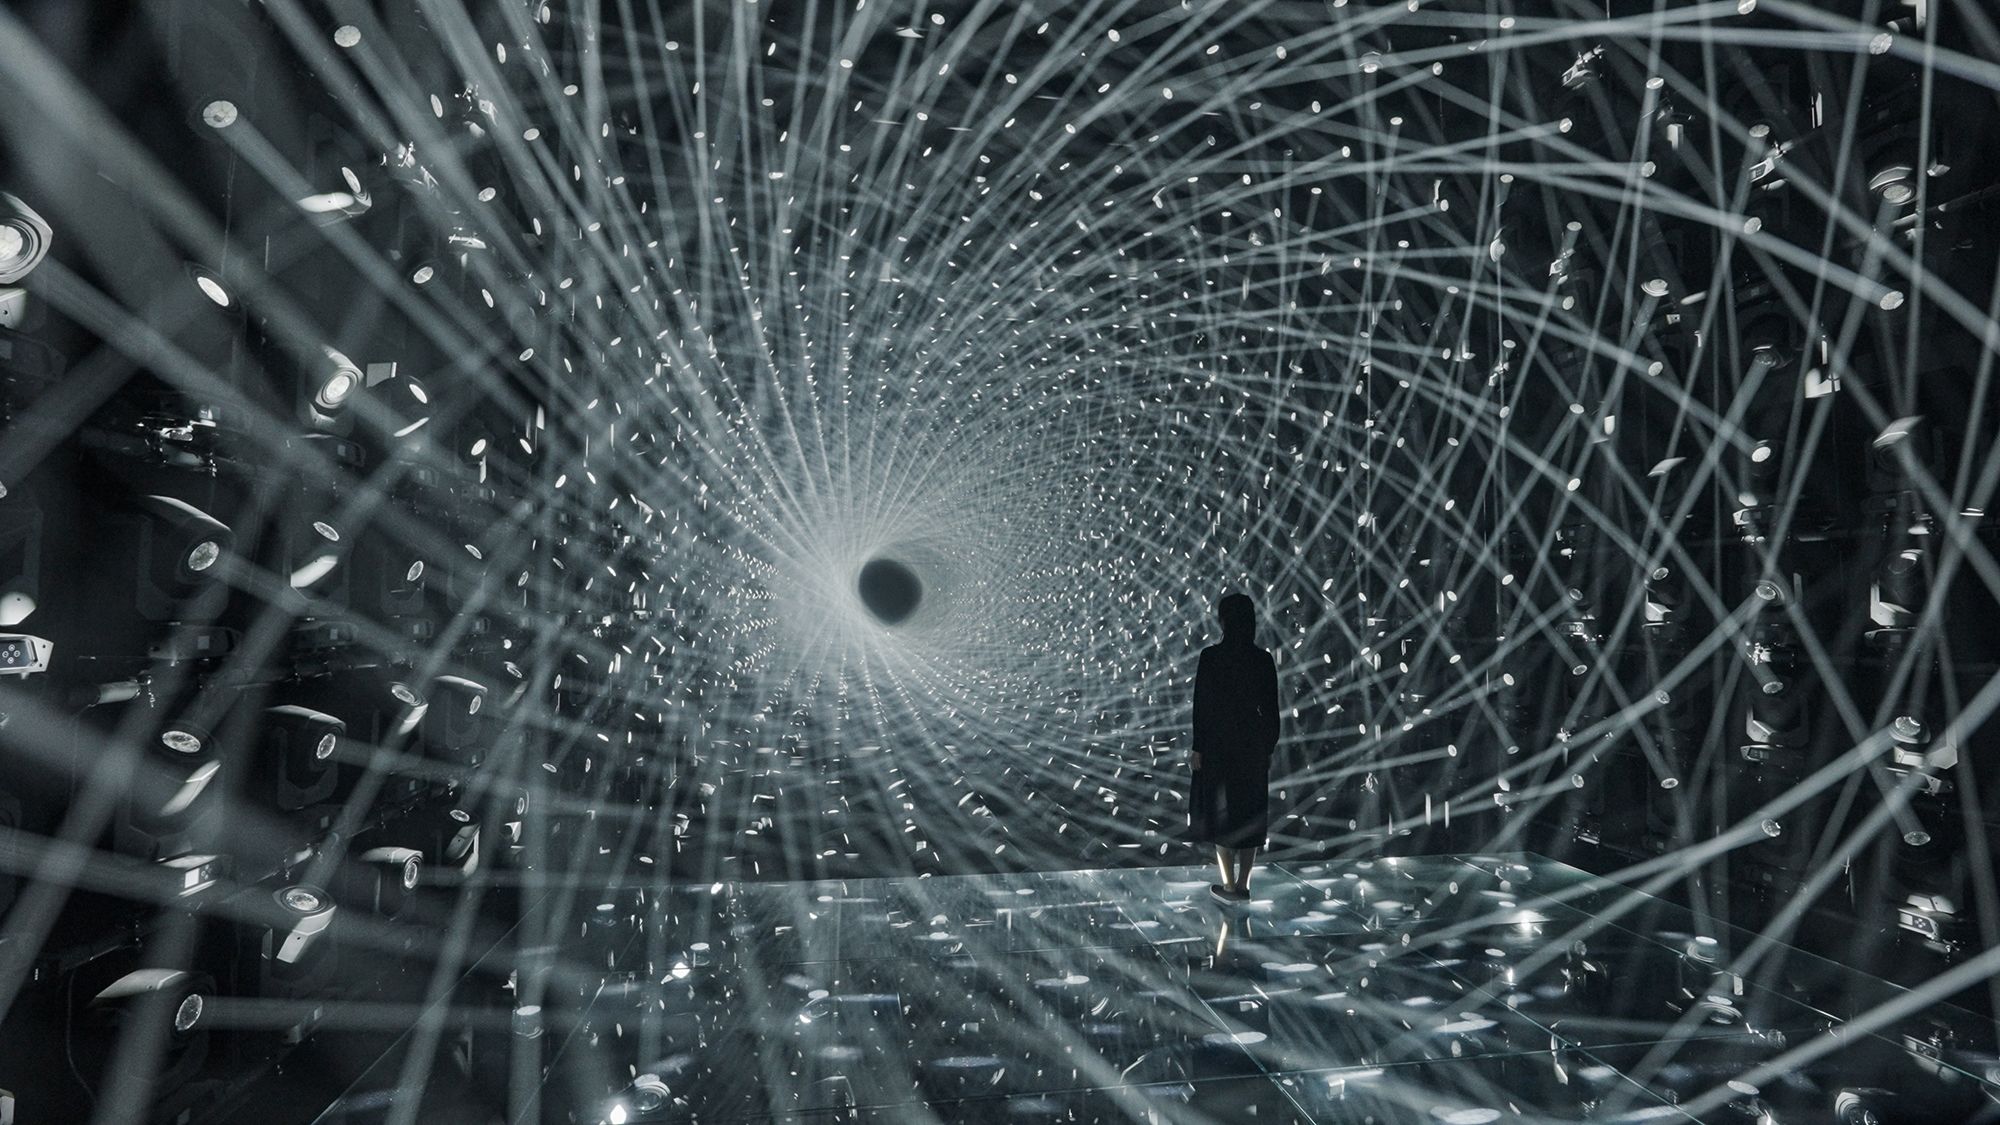 "Tunnel into the Mirror Universe" is described by teamLab as comprising "light sculptures."